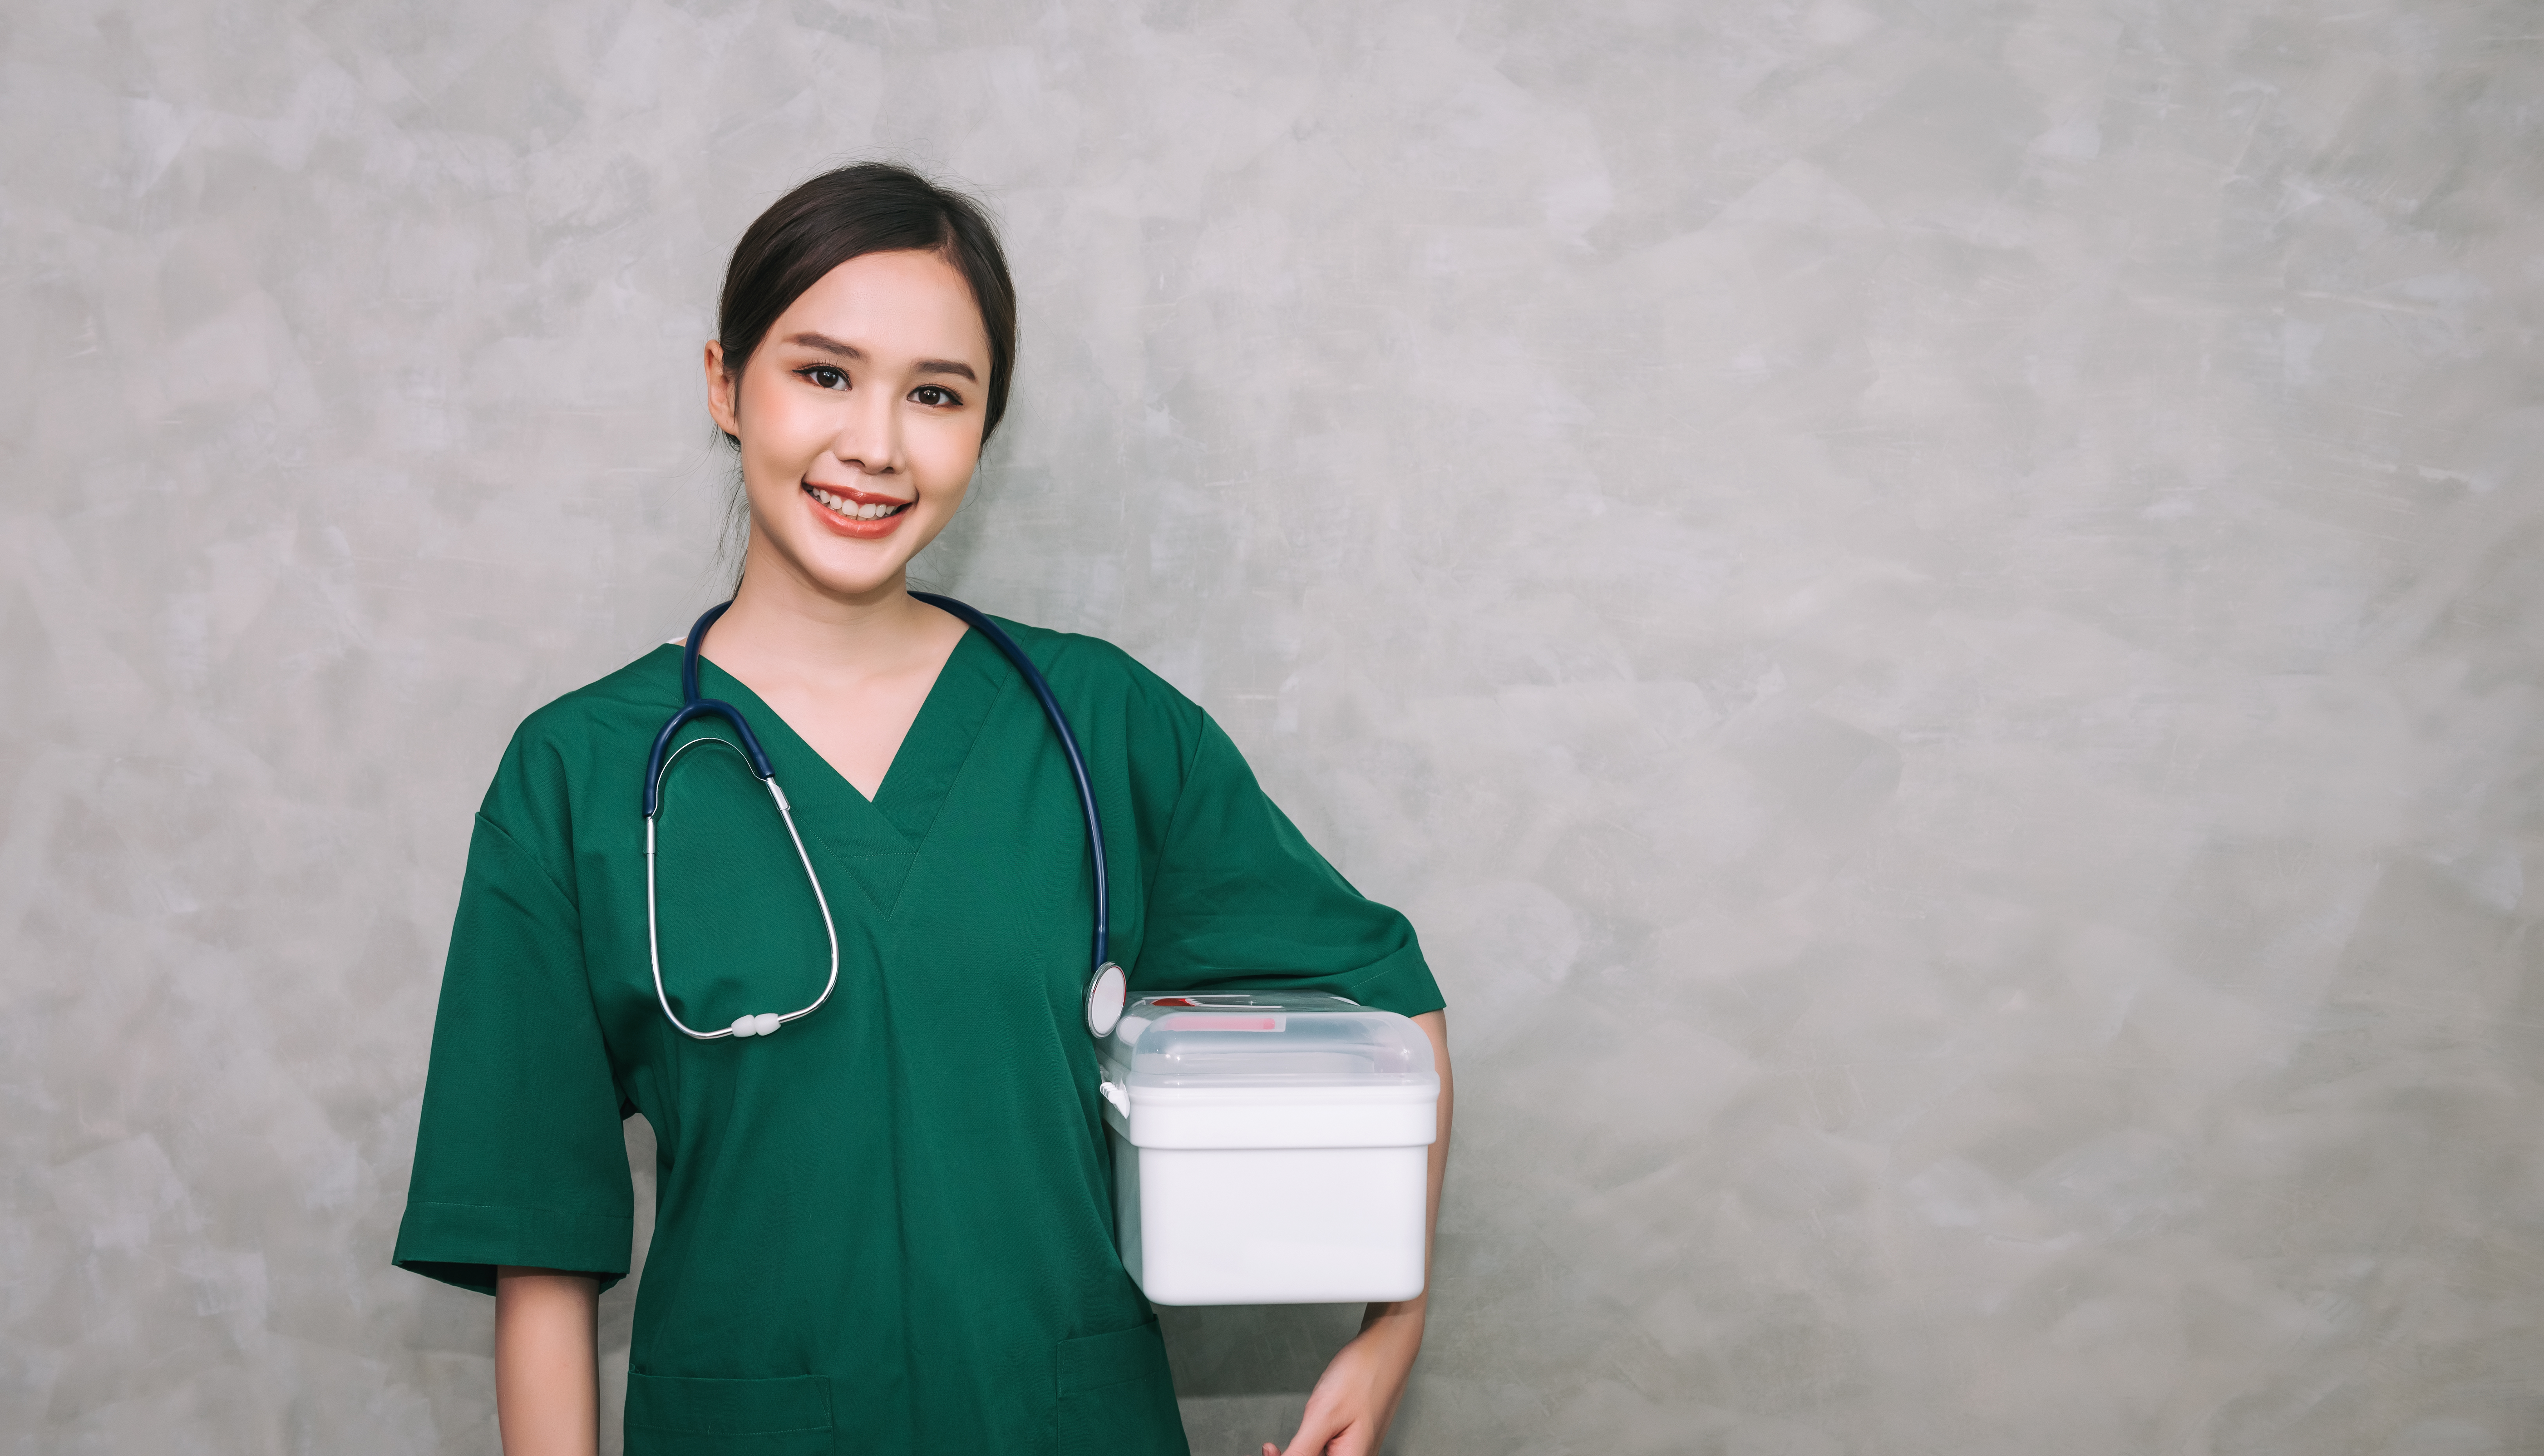 Top 7 Qualities Employers Are Looking For In A Nurse Assistant